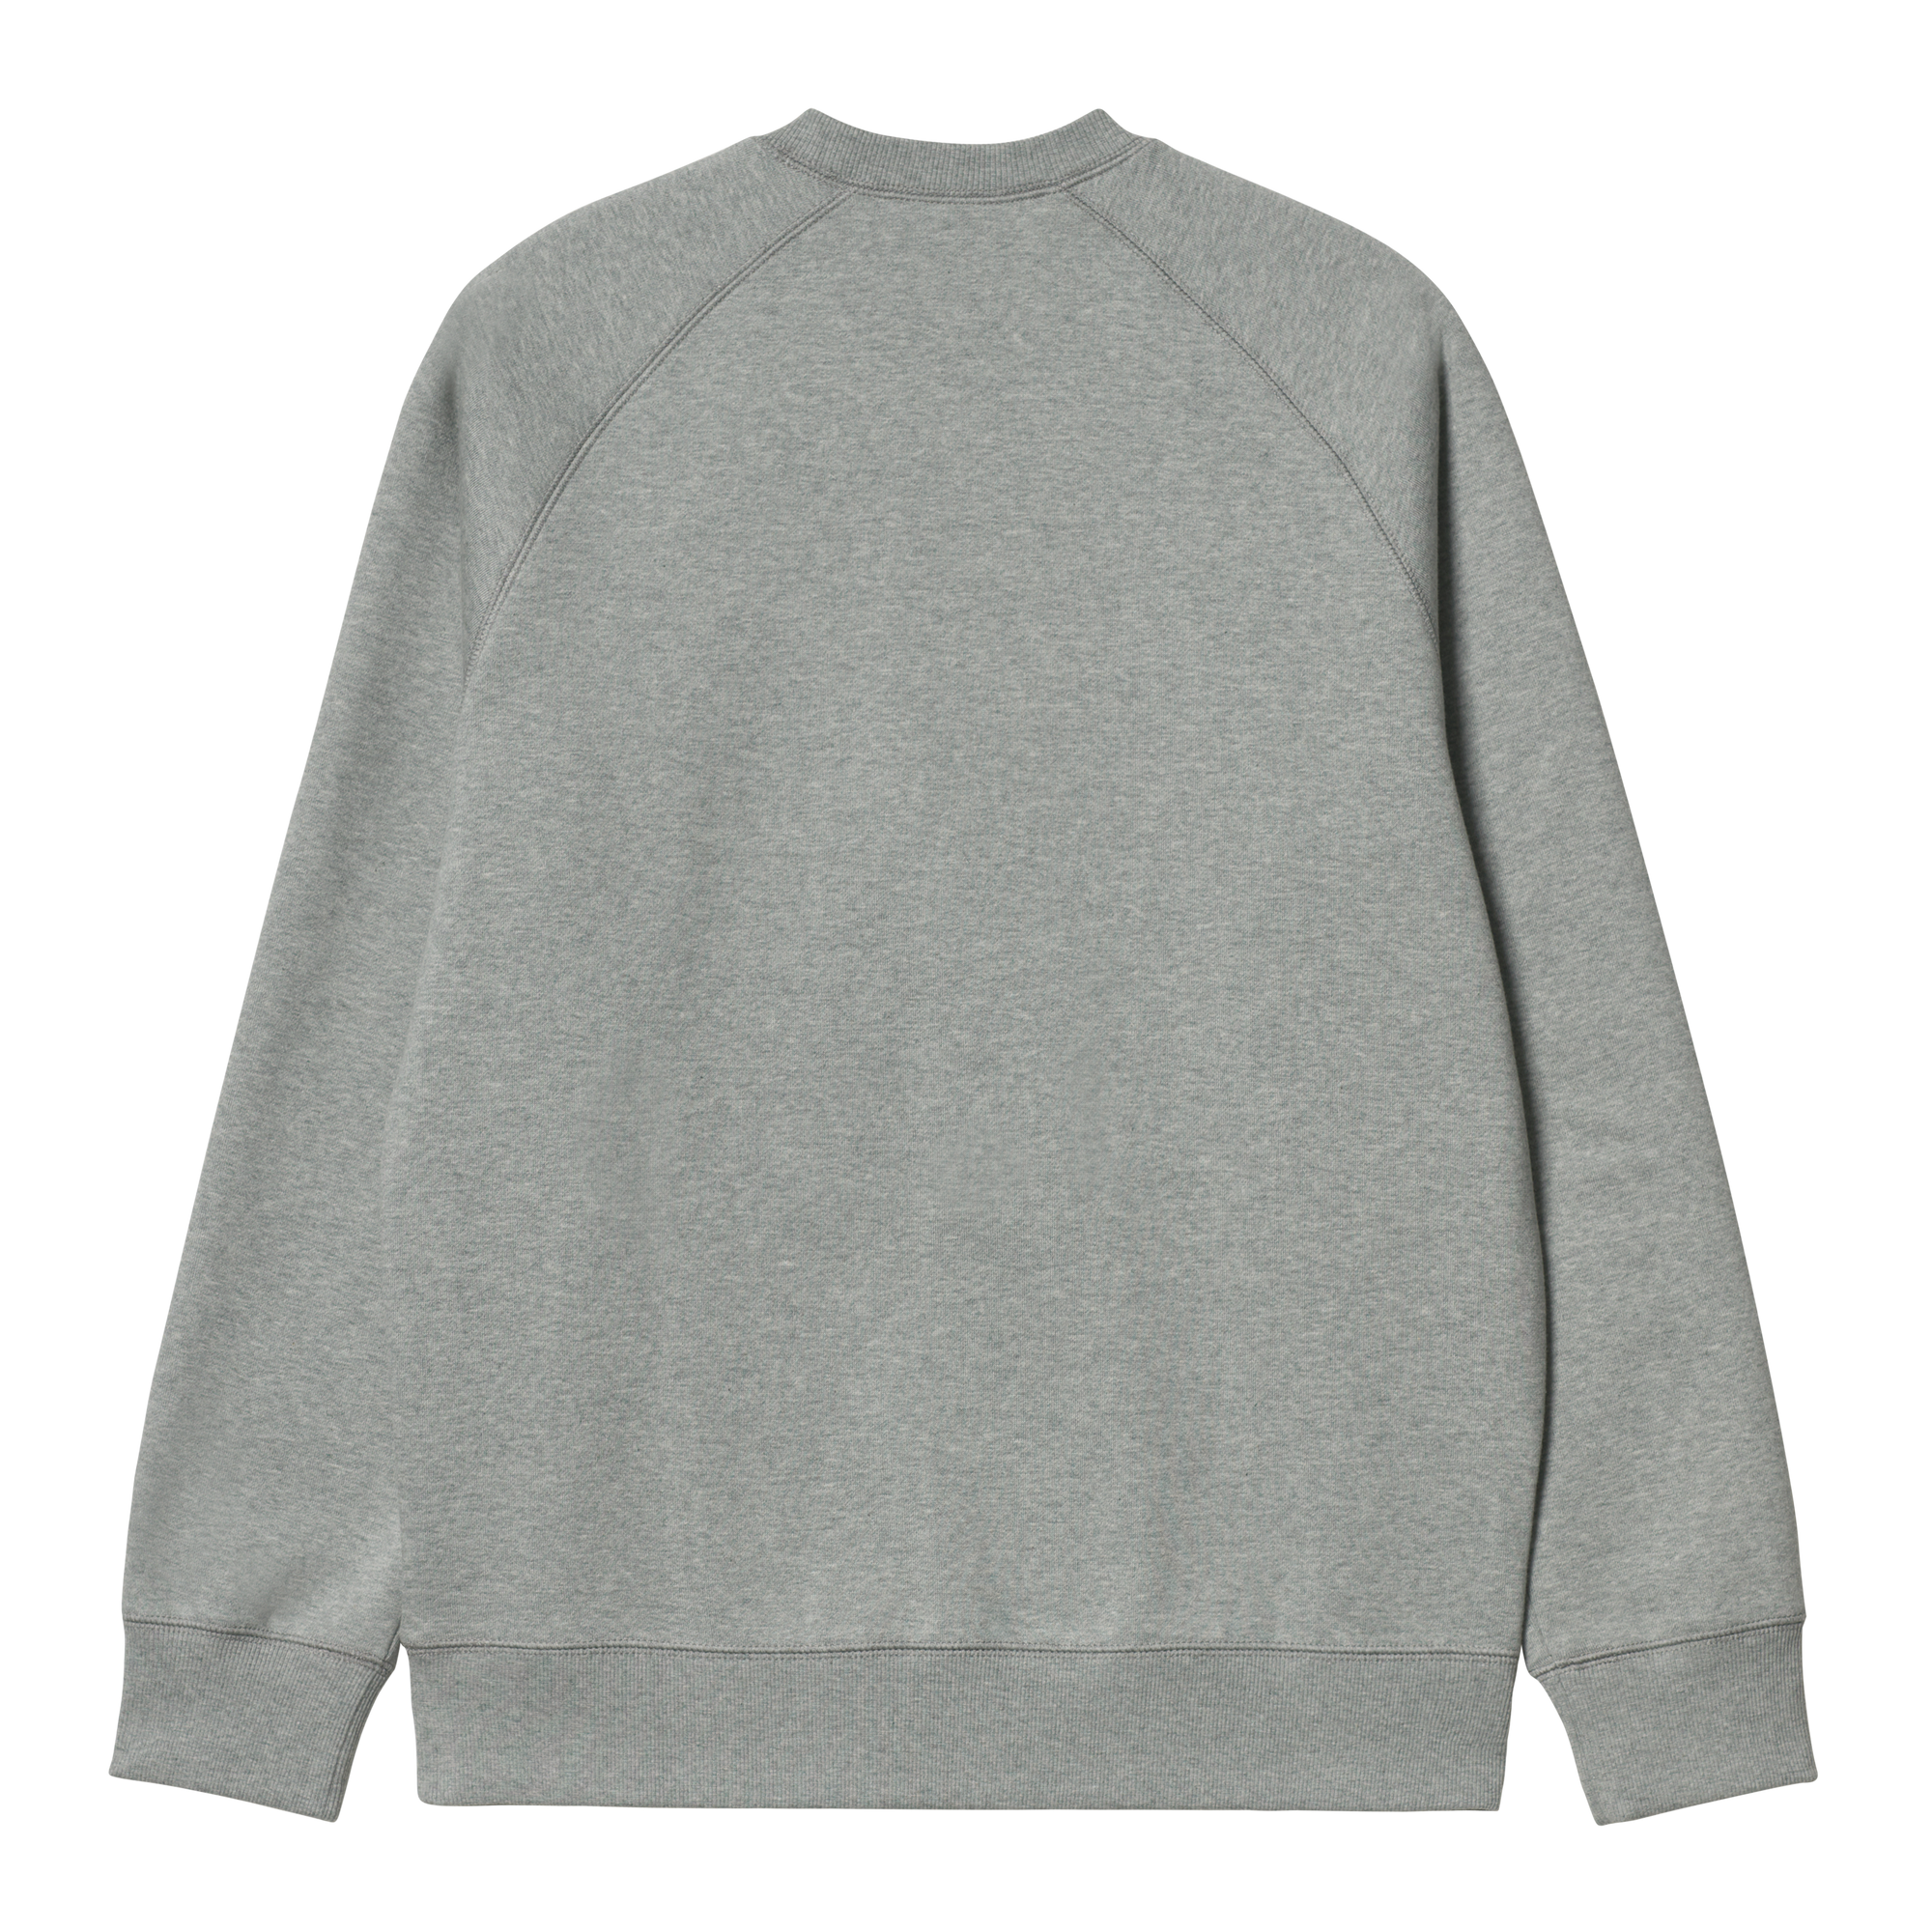 Carhartt WIP Chase Sweat (grey heather/gold) - Blue Mountain Store